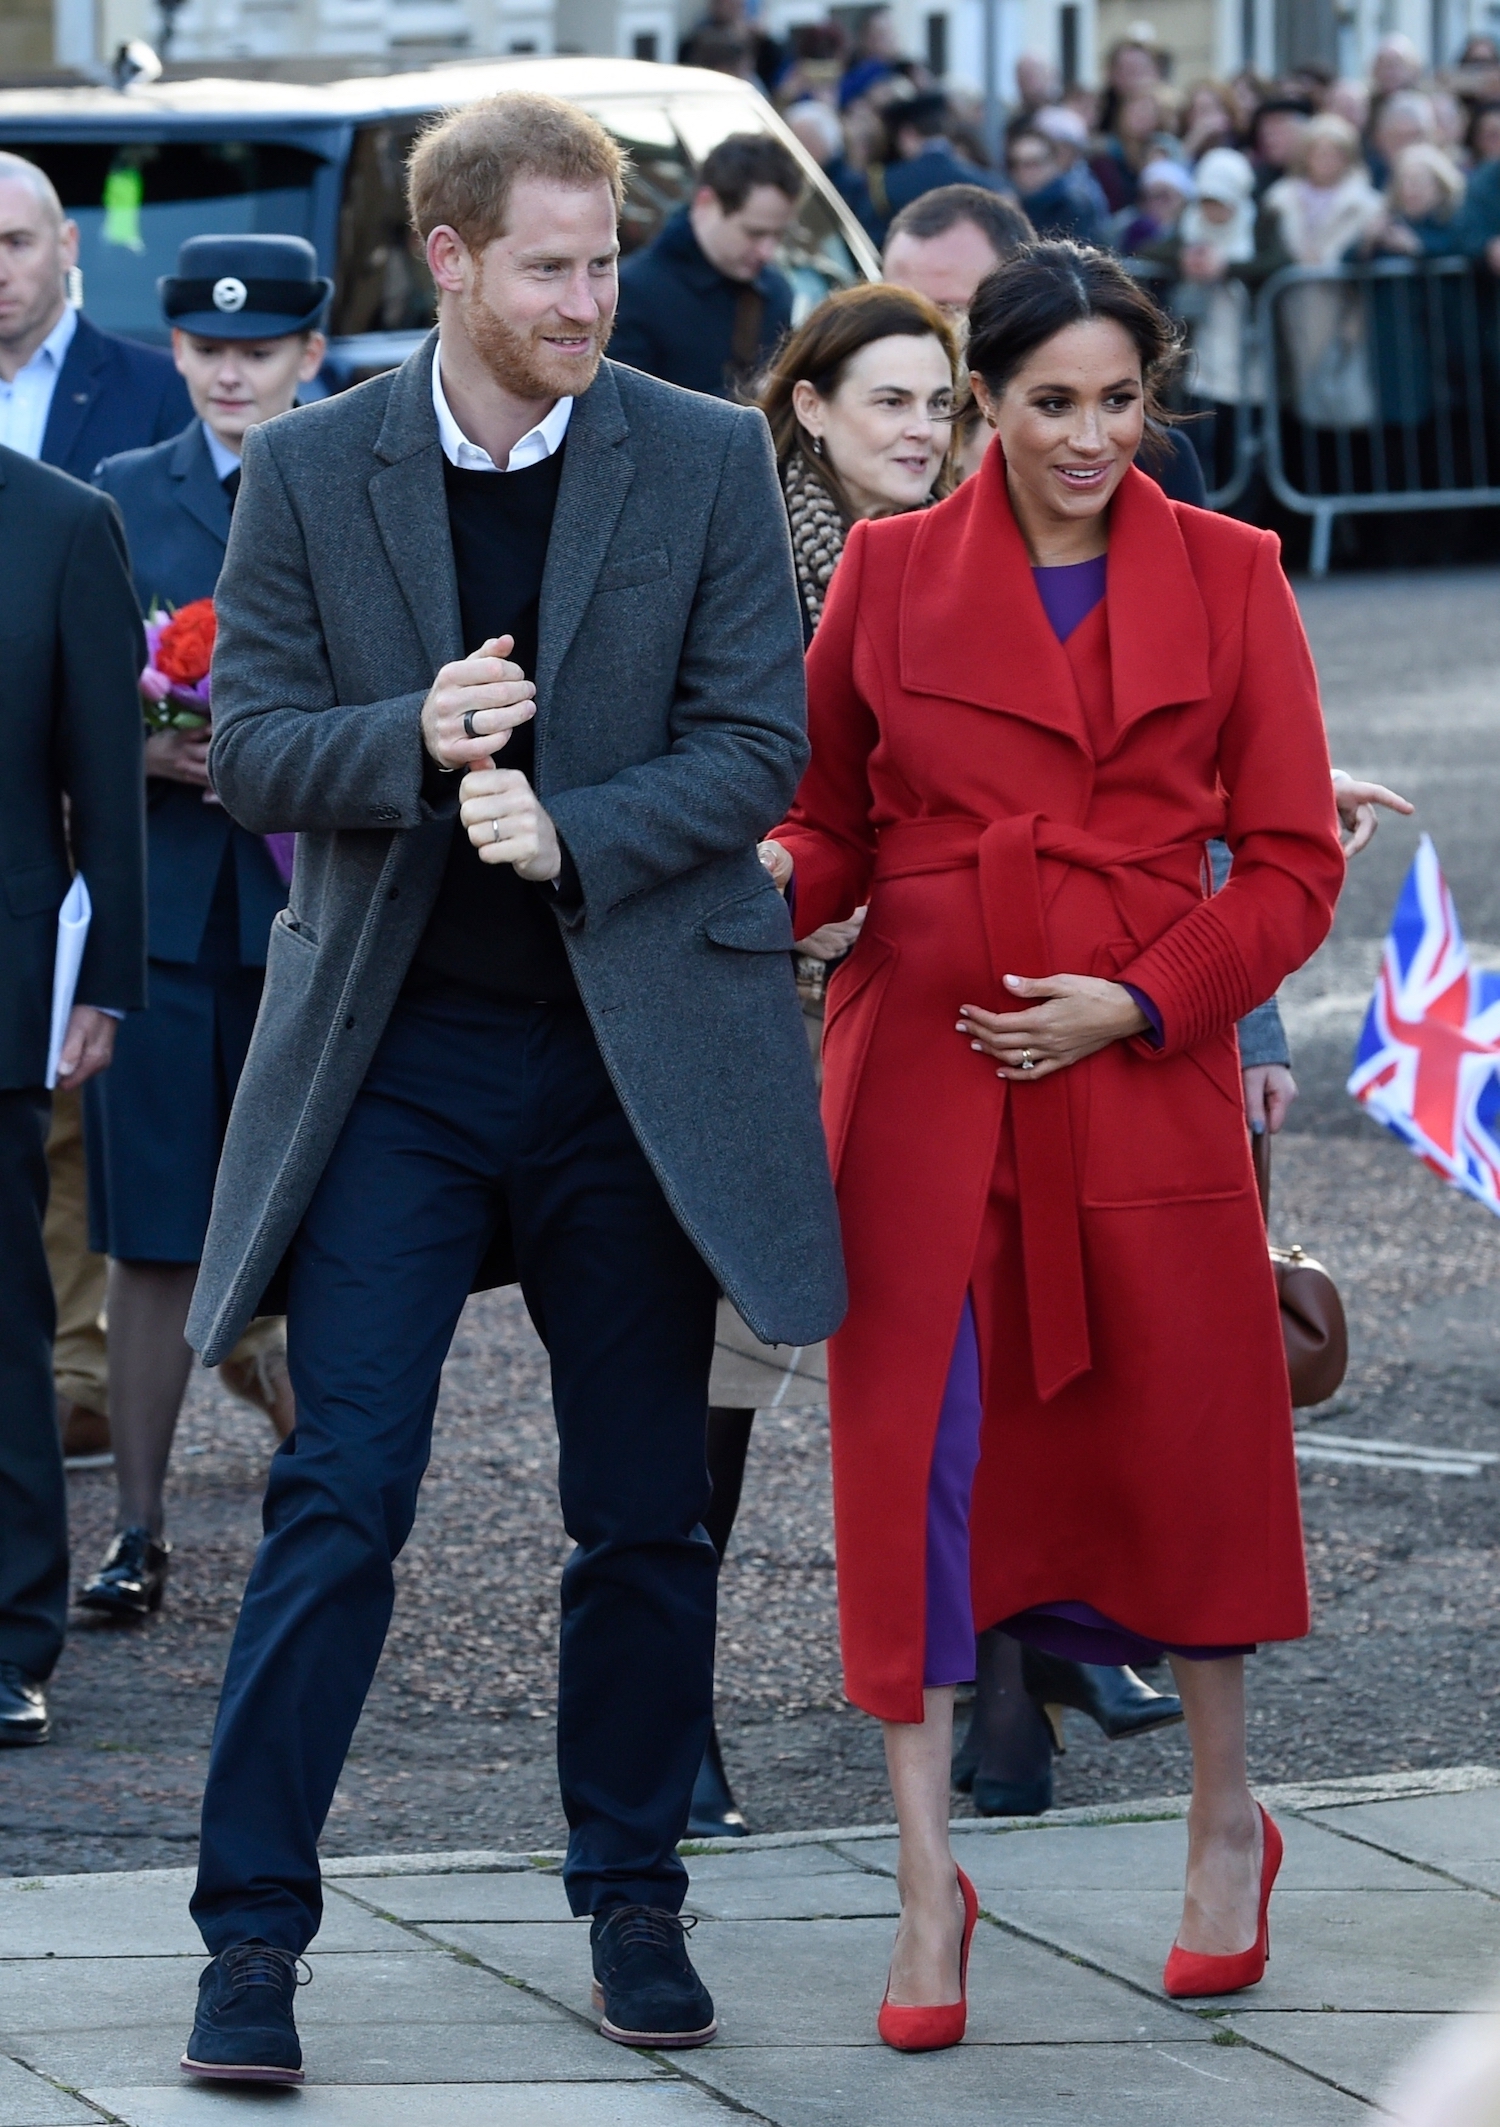 The handbag Meghan Markle wore on her first royal walkabout is trending  again